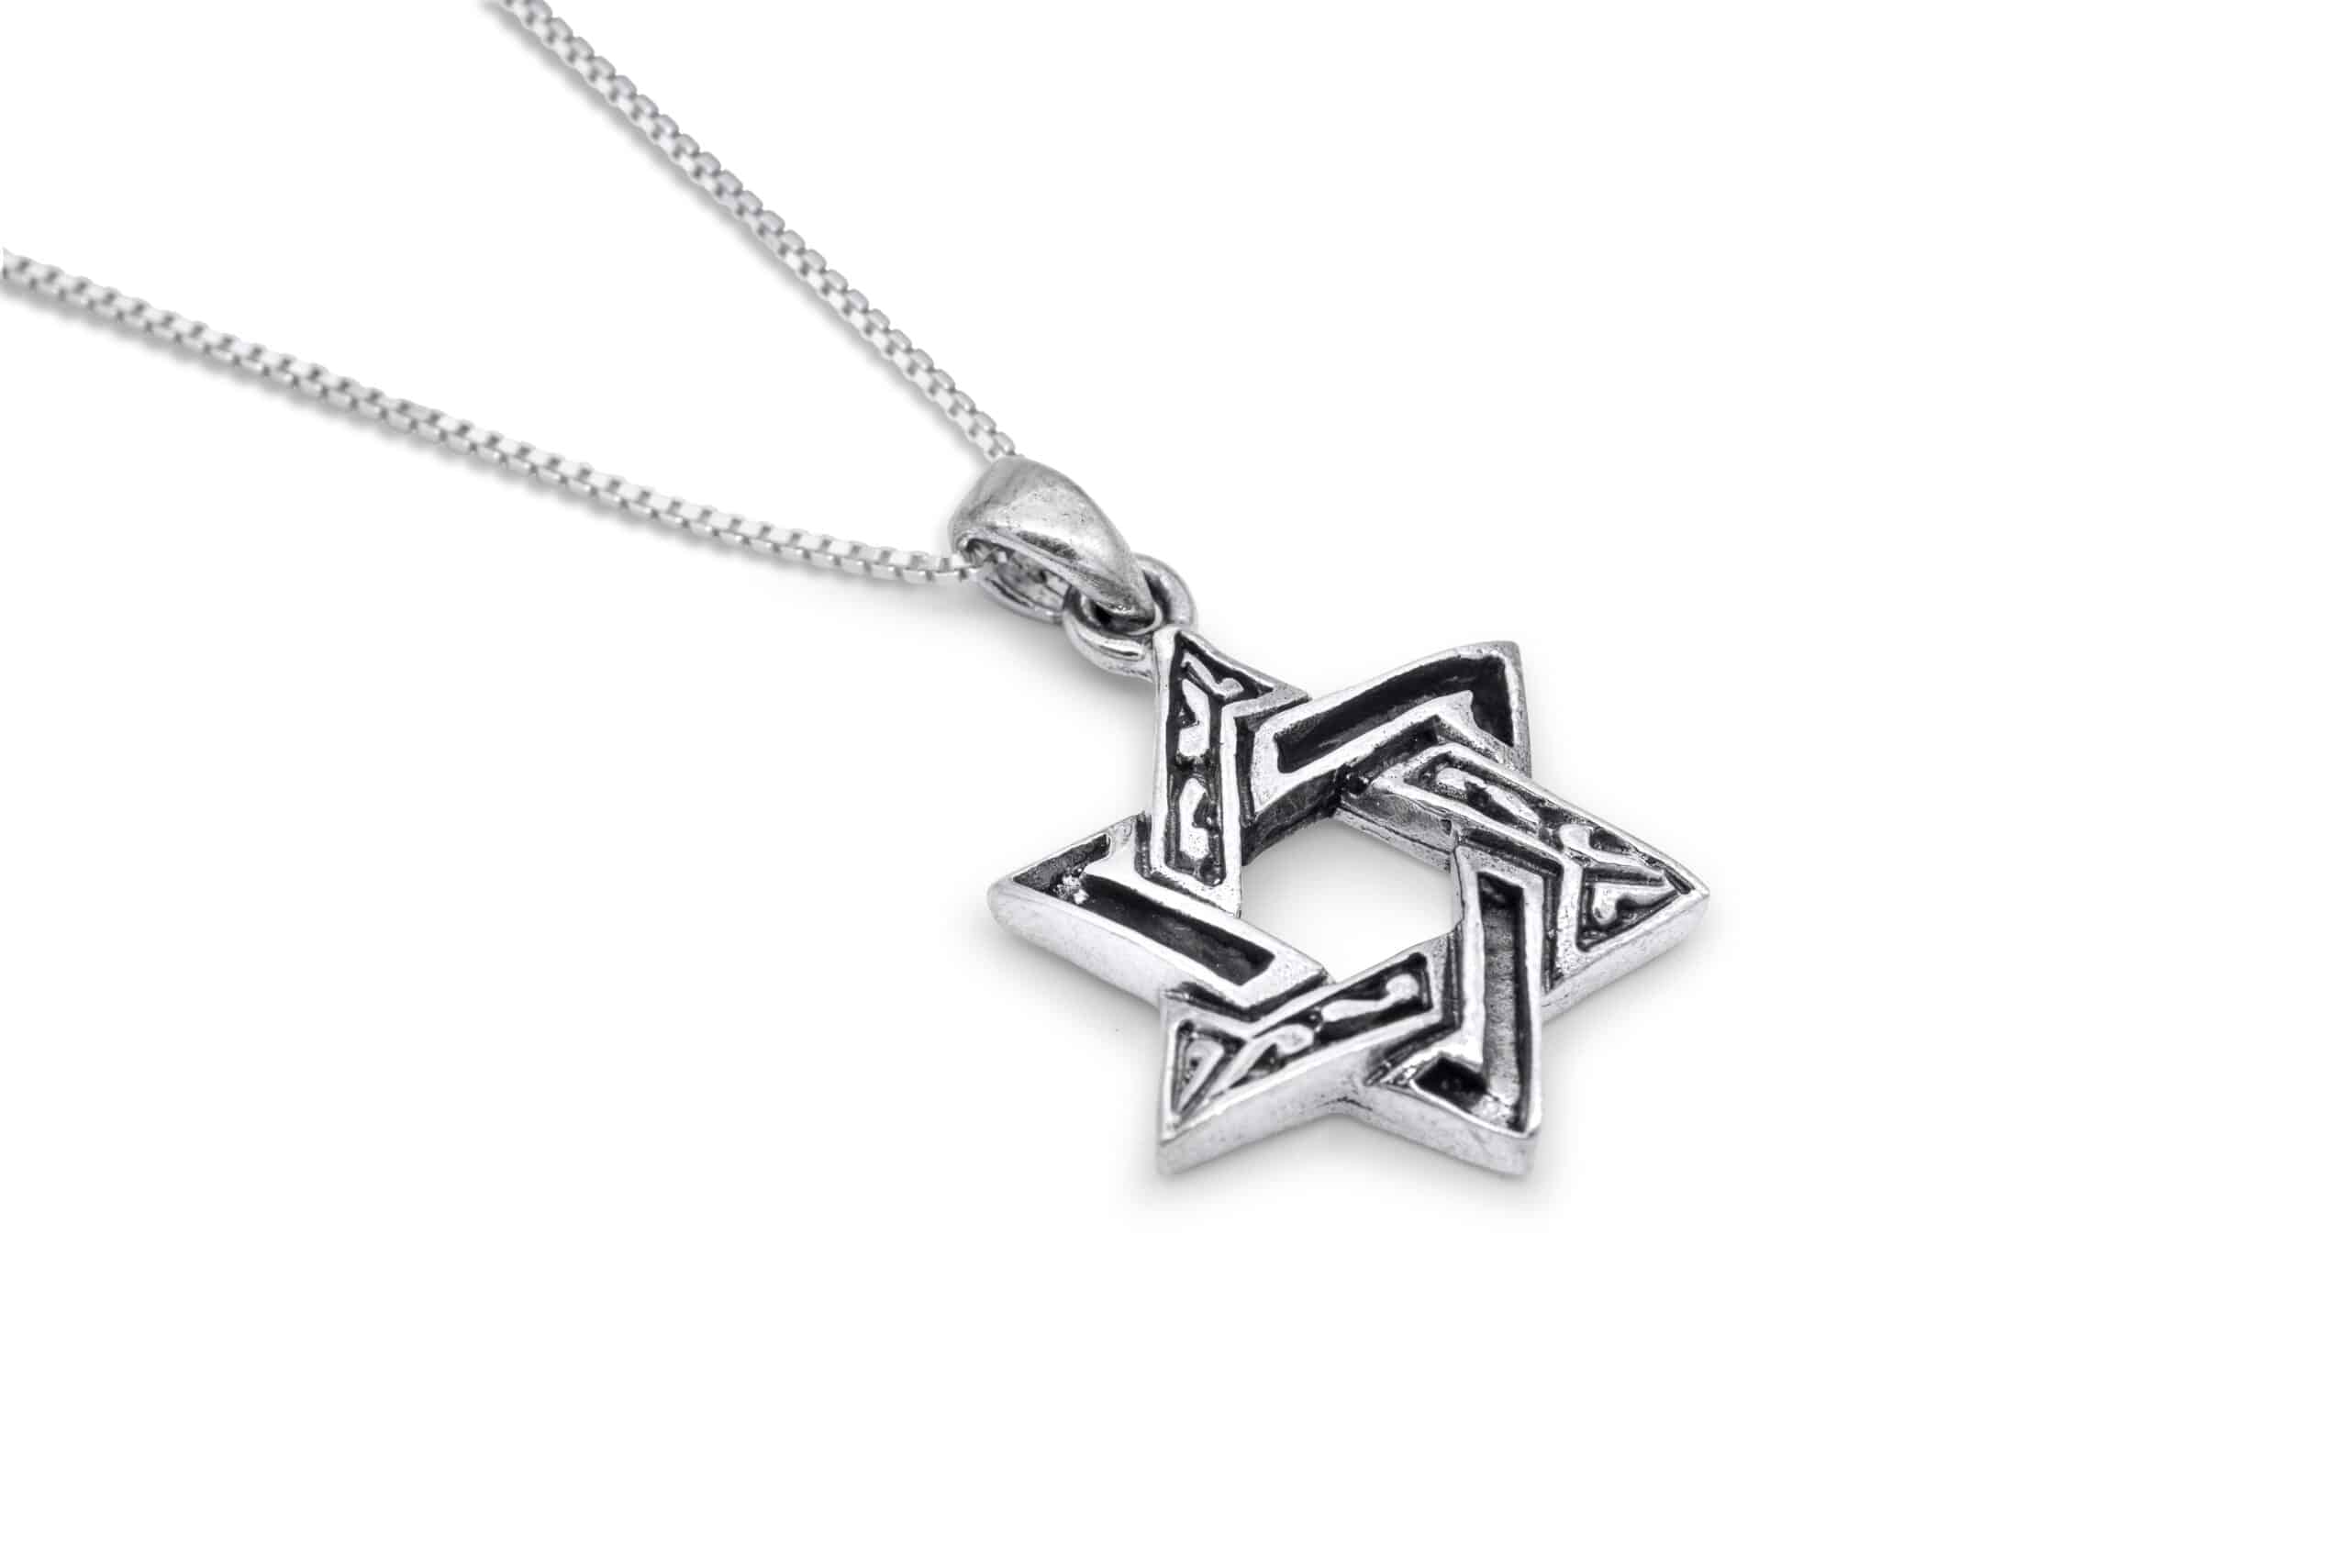 Large Sterling Silver Star of David Pendant with Adornments